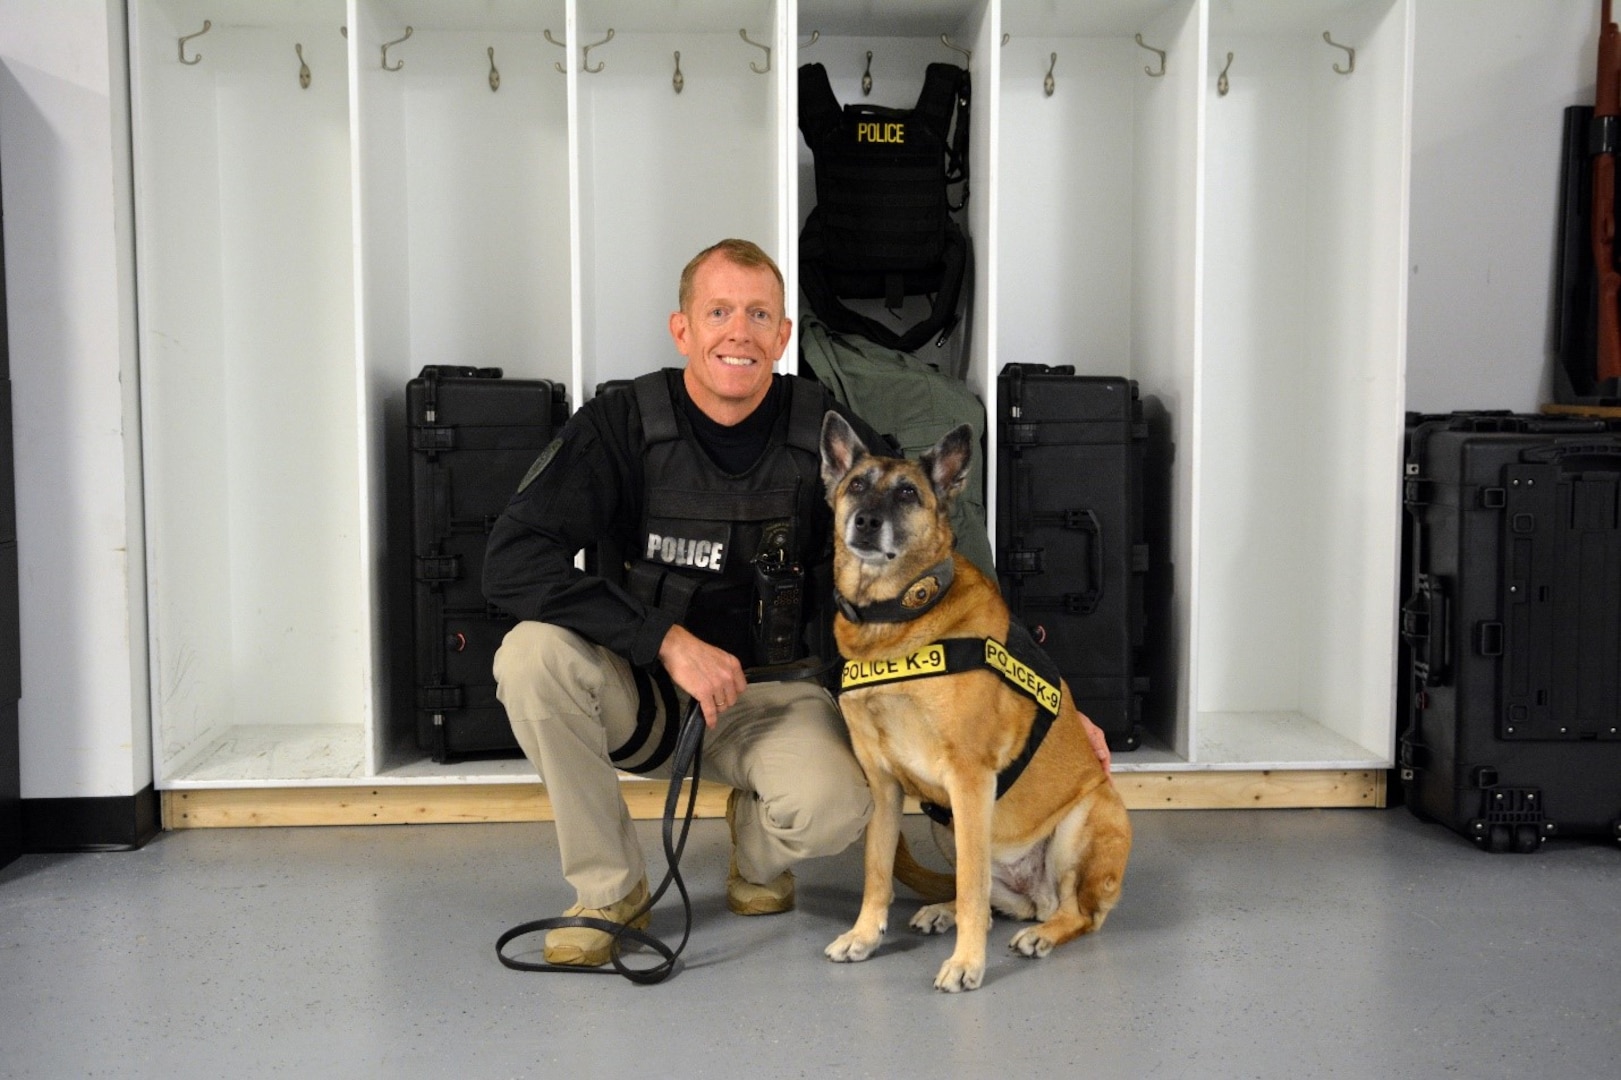 DIA Police Capt. William McEnaney poses for a photo with Norma Jean in the K-9 office in Reston, Va. (Photo by Ally Rogers, DIA Public Affairs)